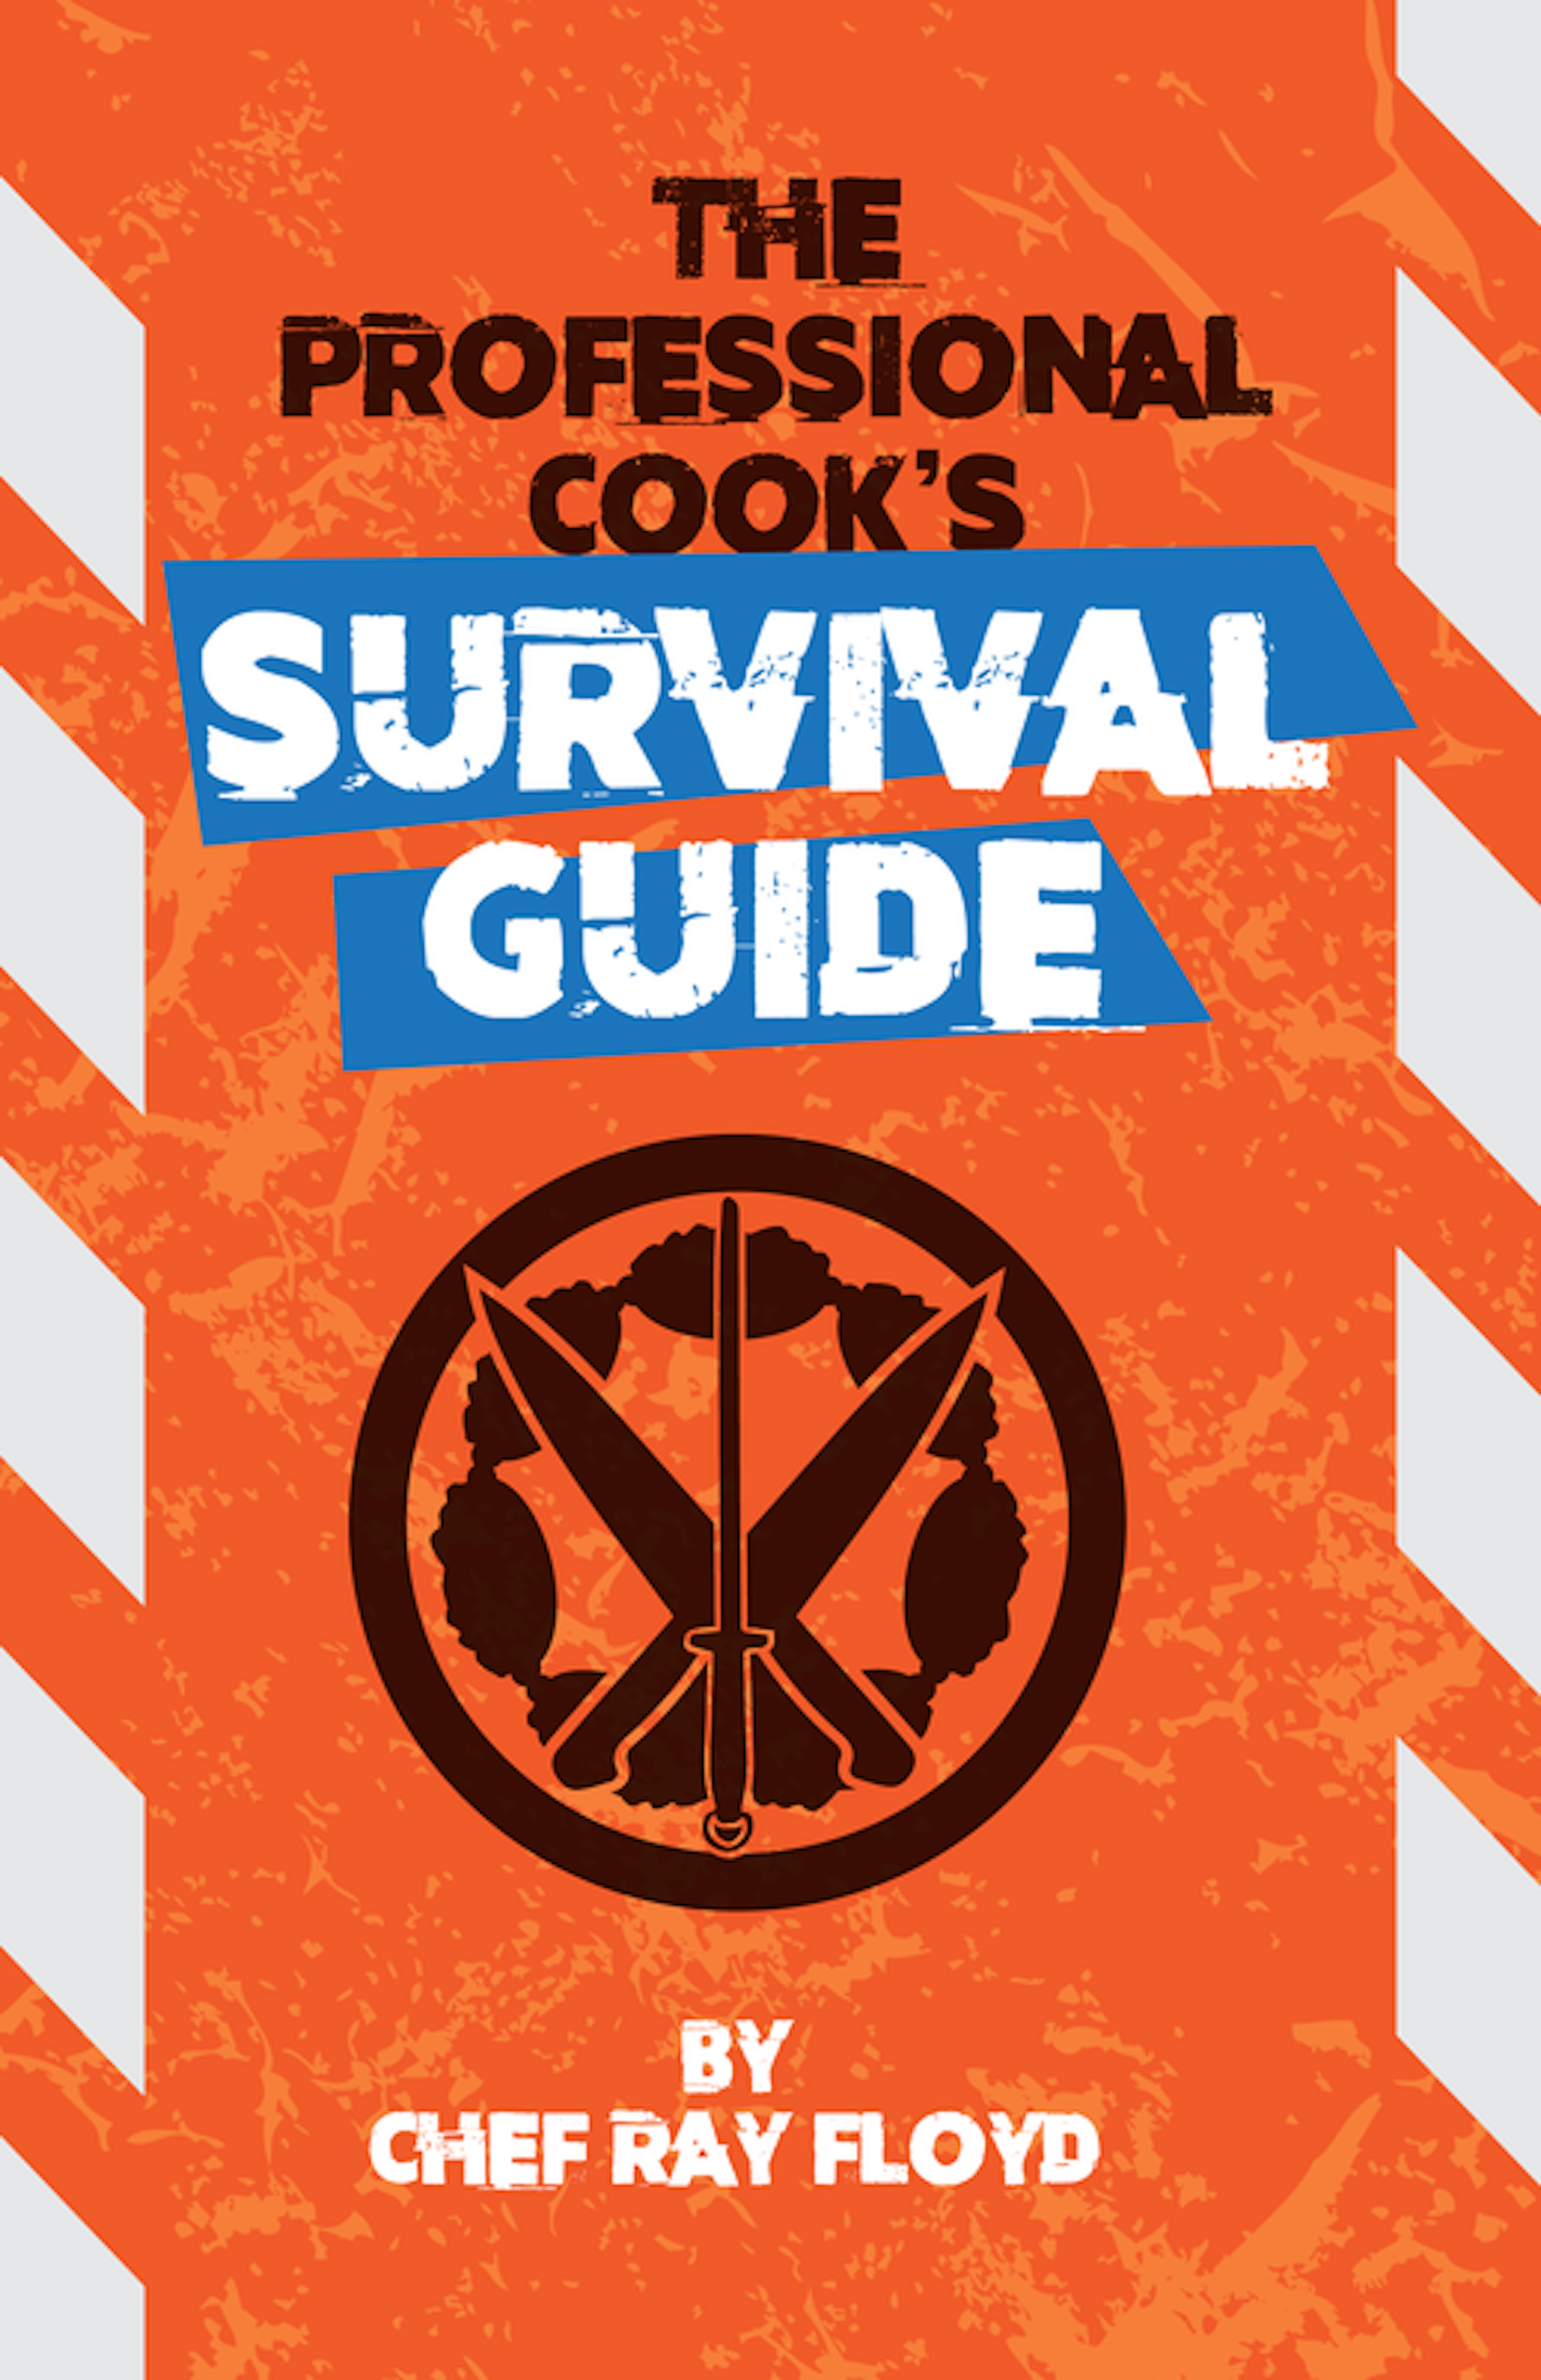 The Professional Cook's Survival Guide